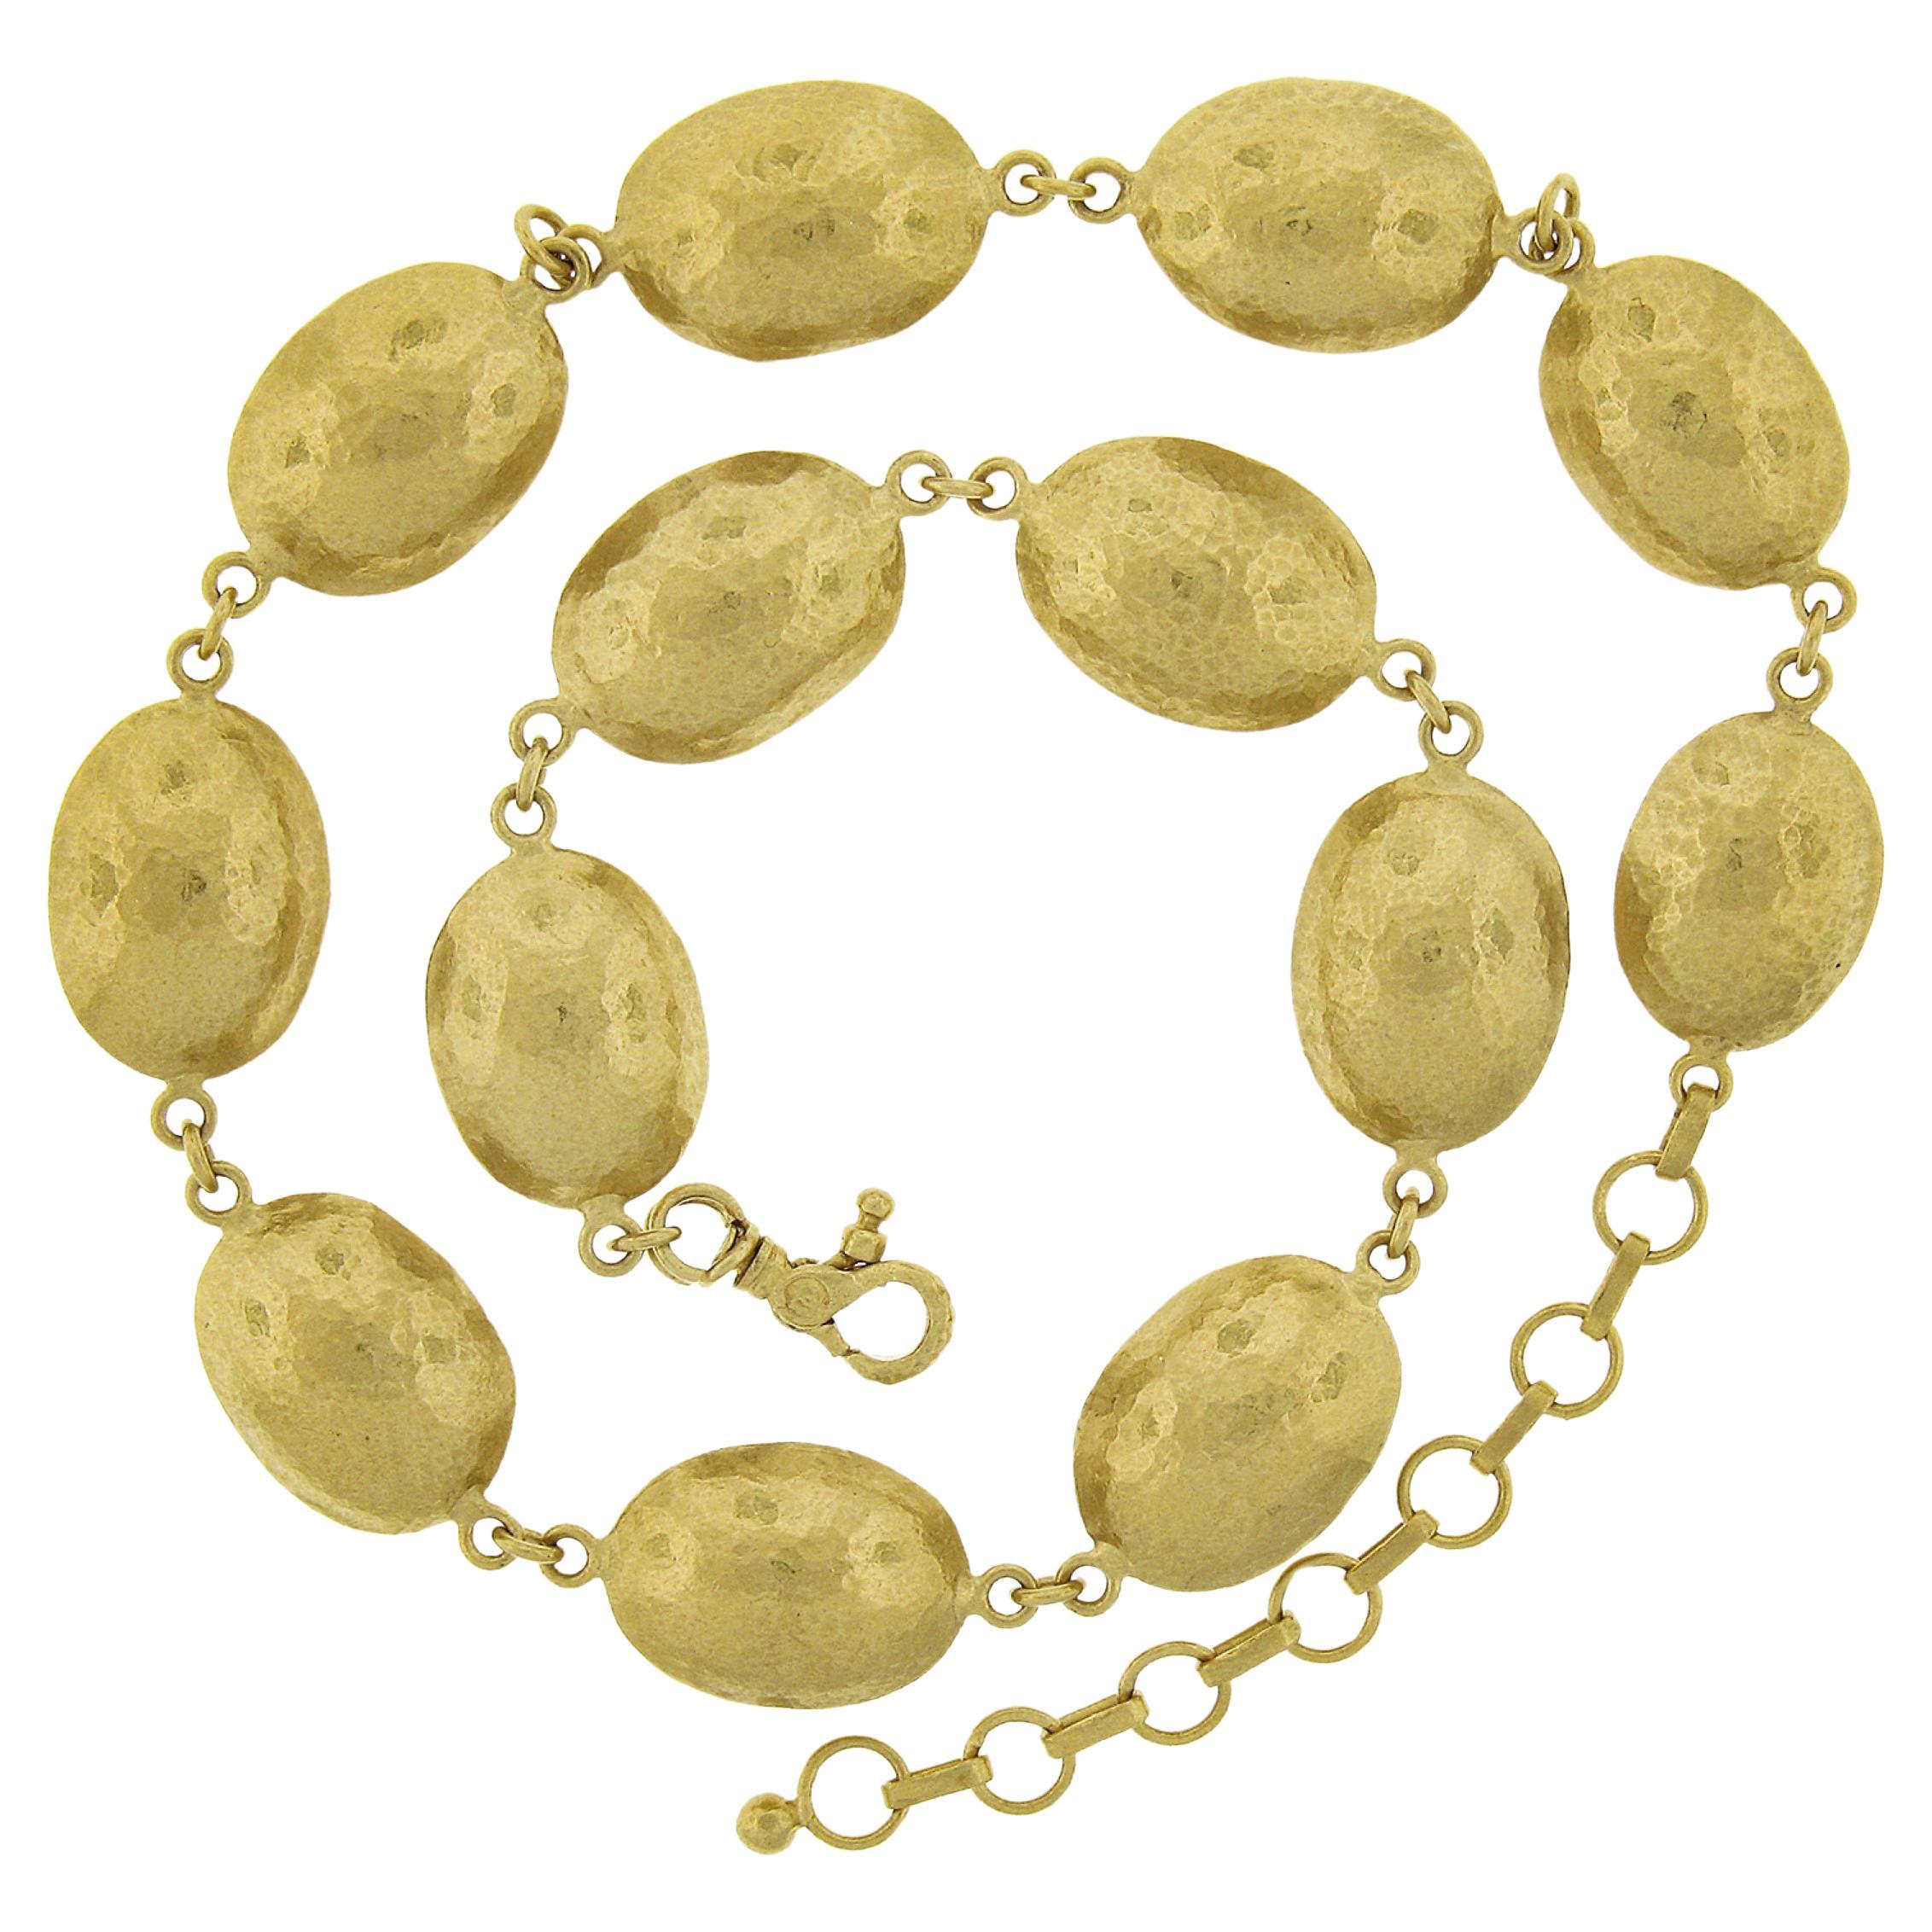 Gurhan .990 Yellow Gold 17.5" Puffed Domed Hammered Oval Link Chain Necklace